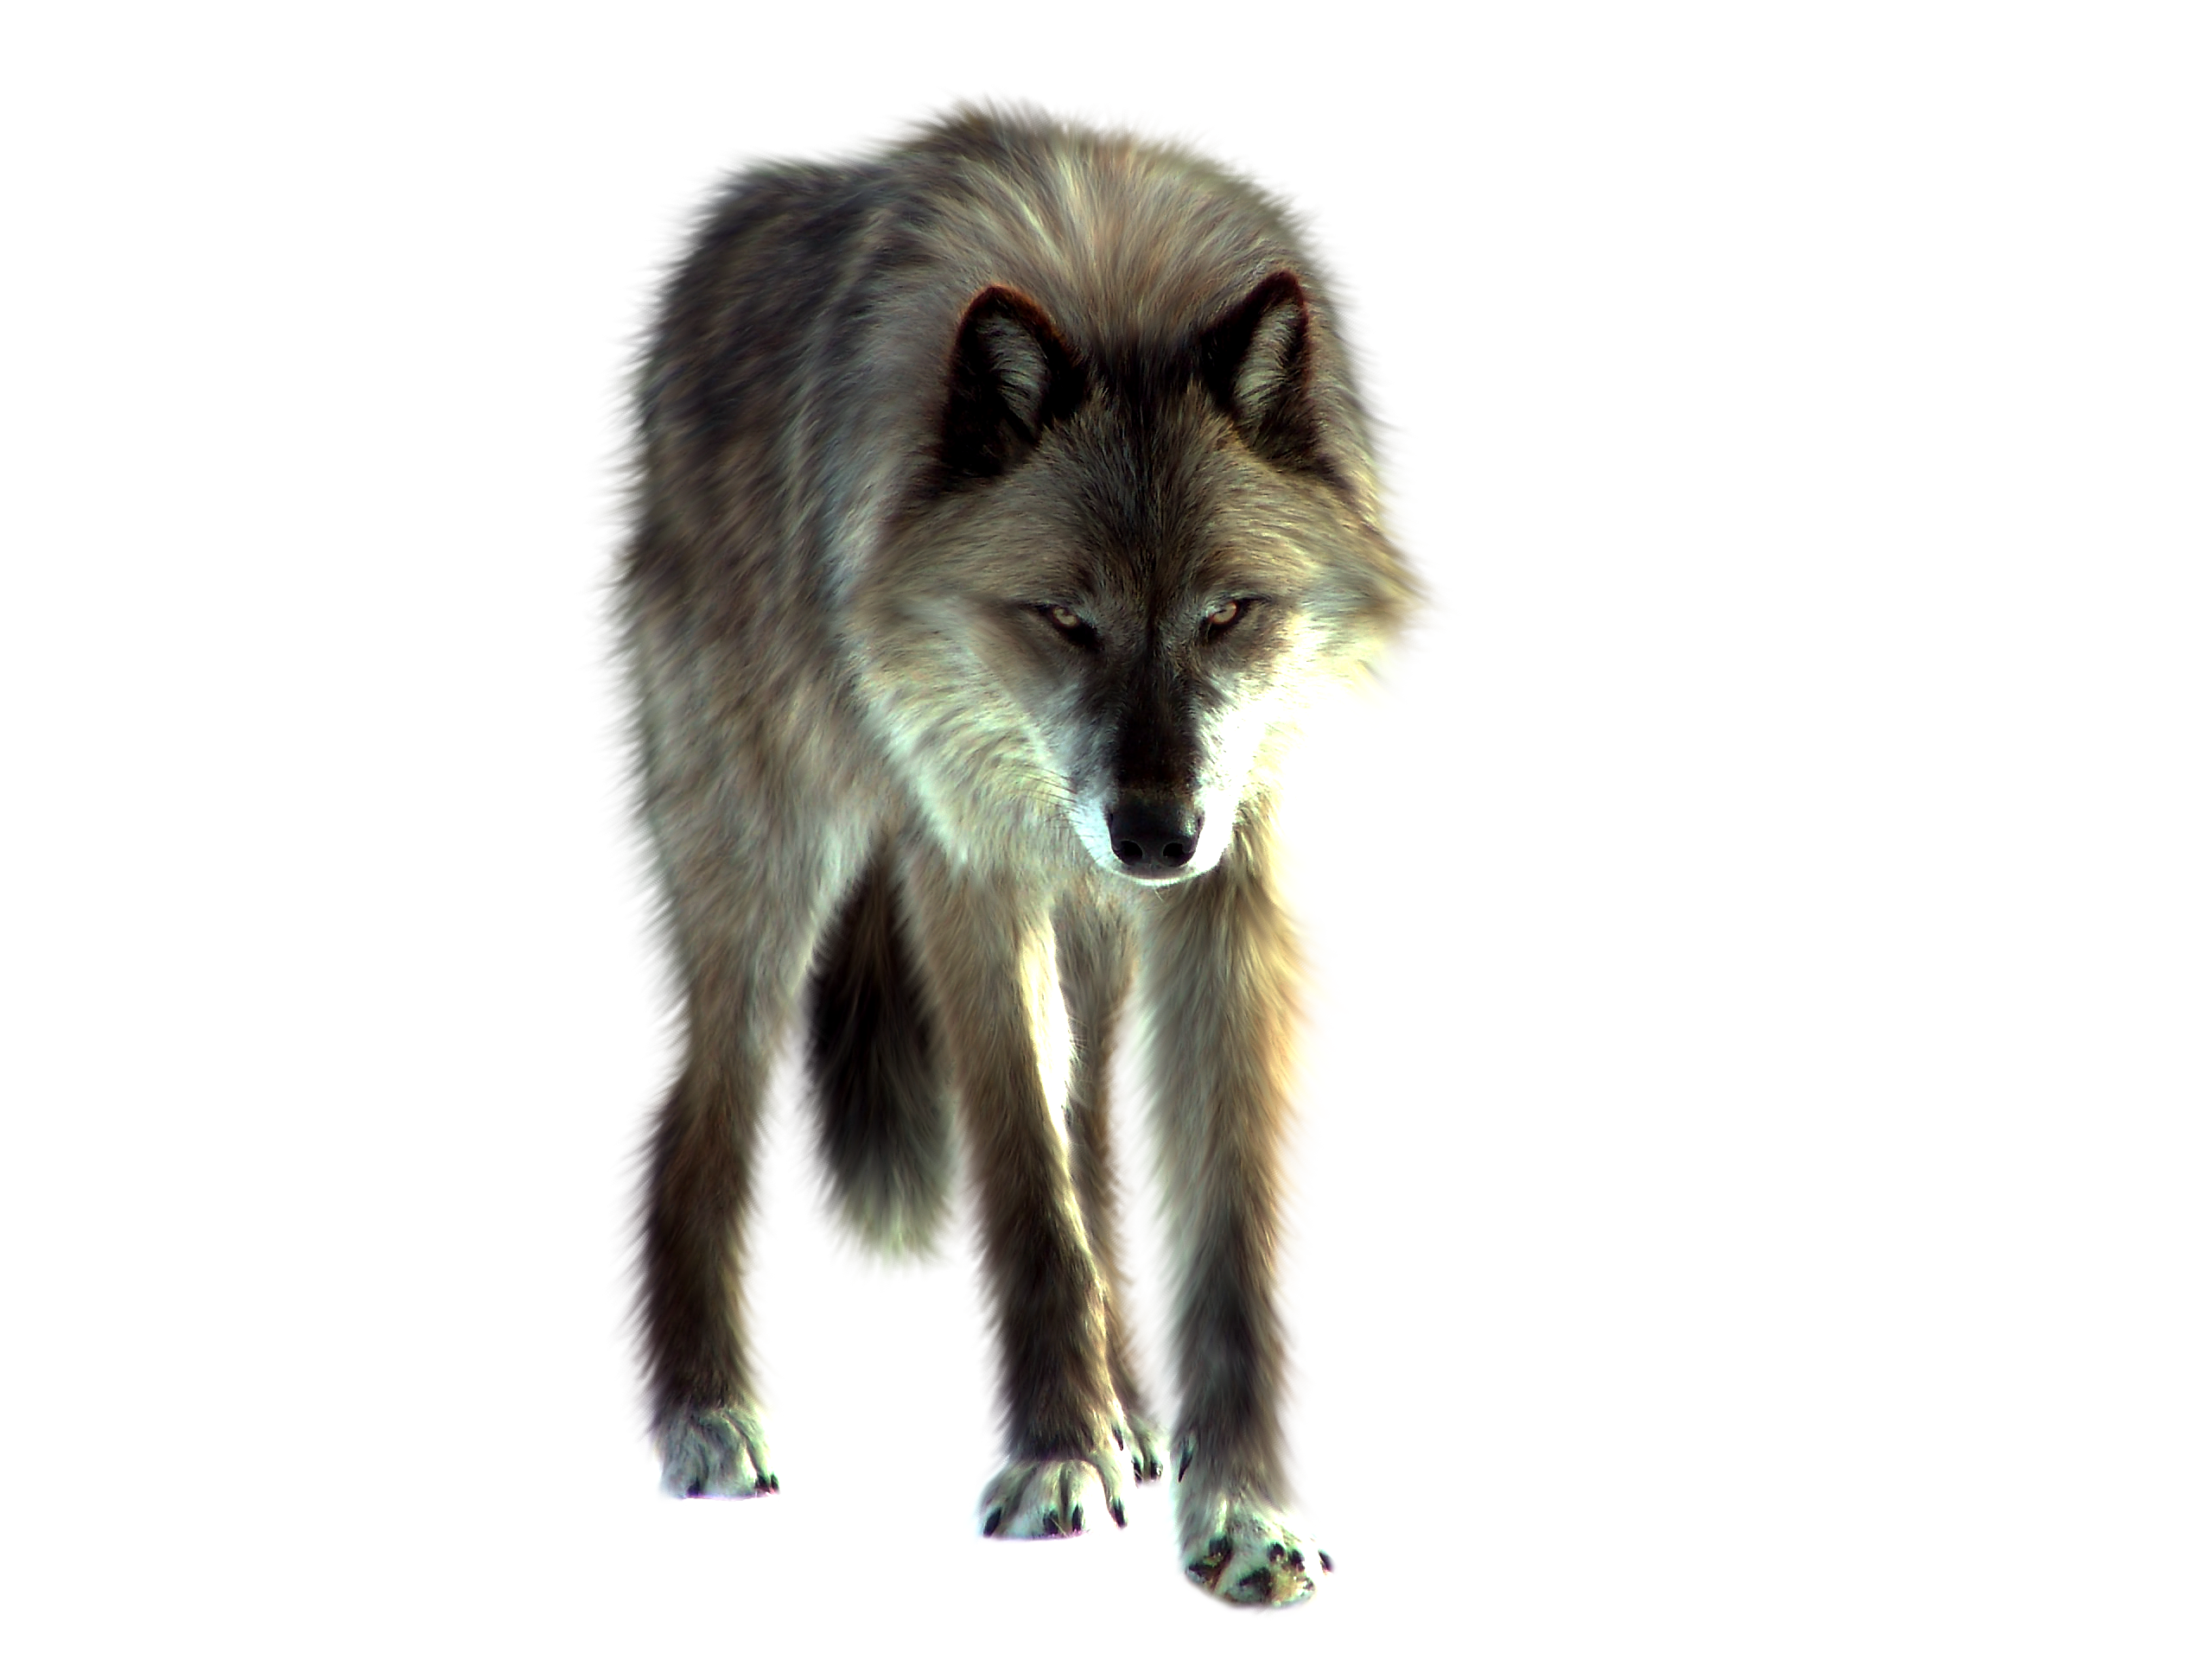 Wolf Png Image Picture Downlo